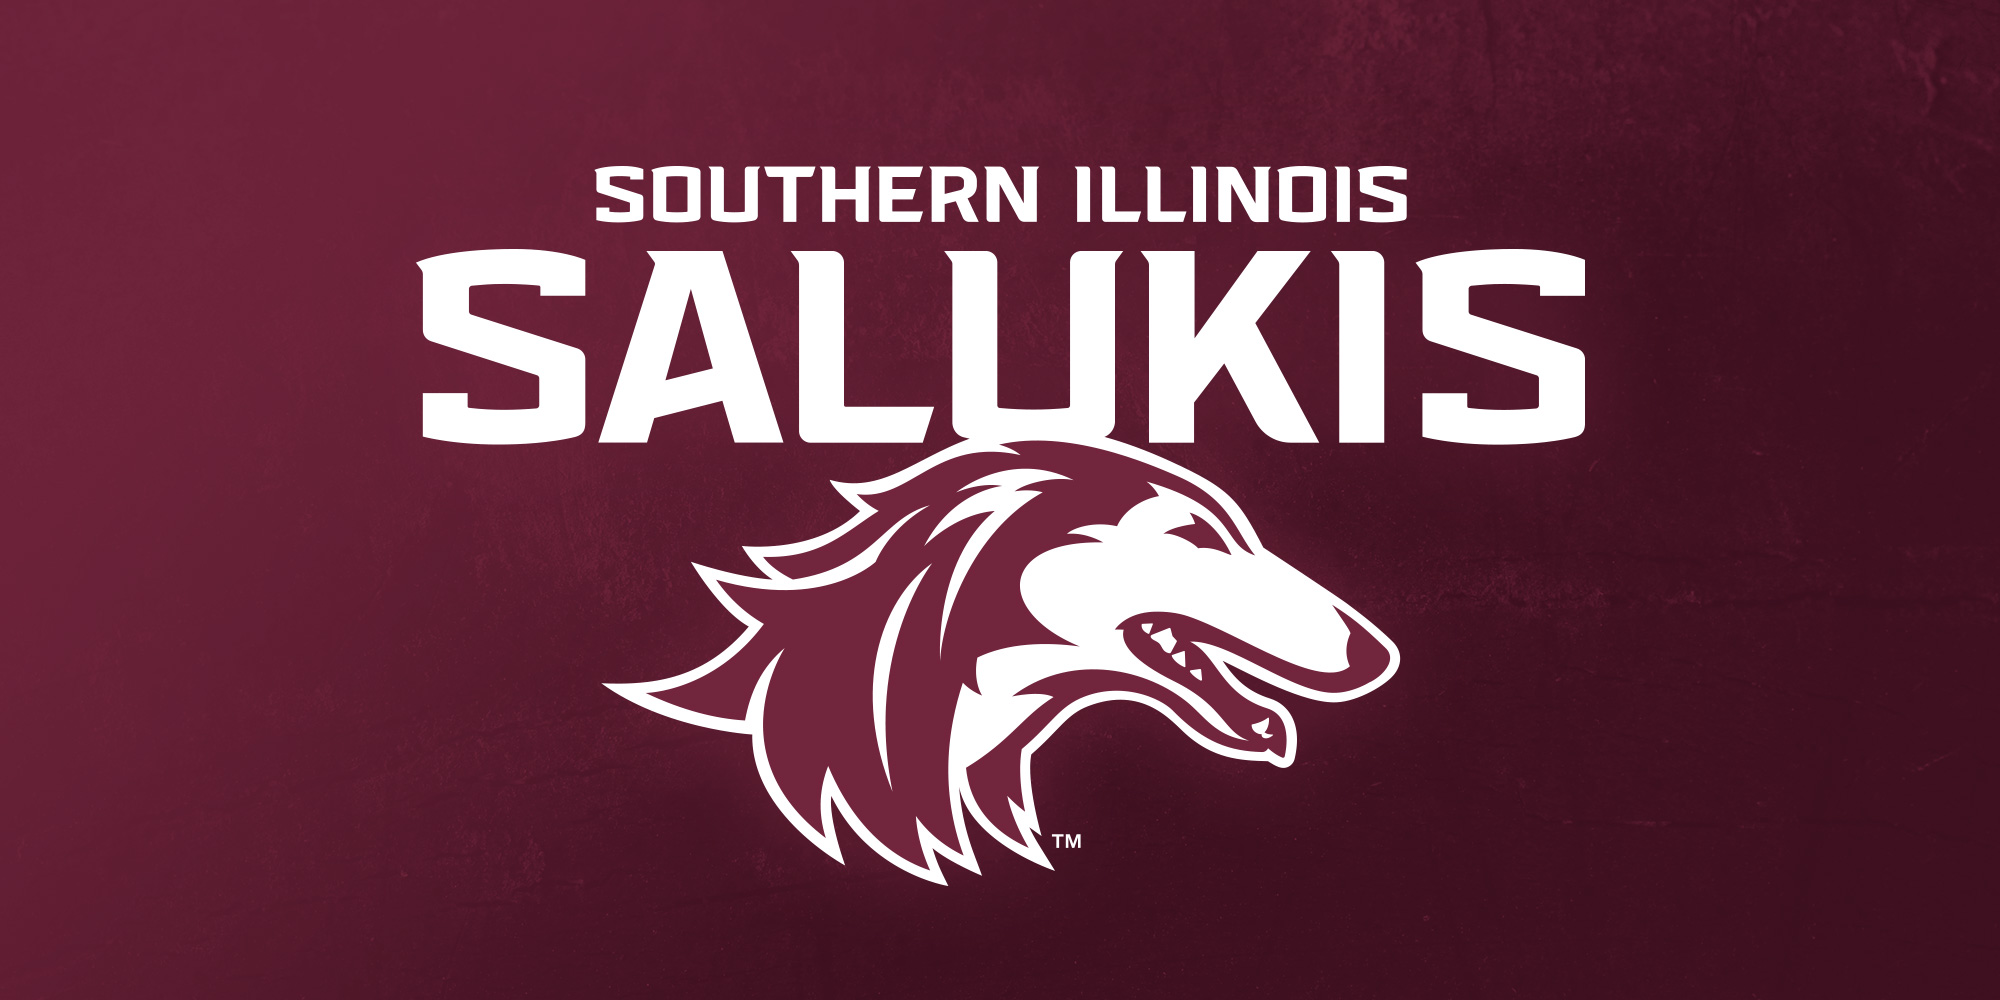 Southern Illinois Basketball Staff Updates: New Assistant Coach and Player Development Coaches Announced